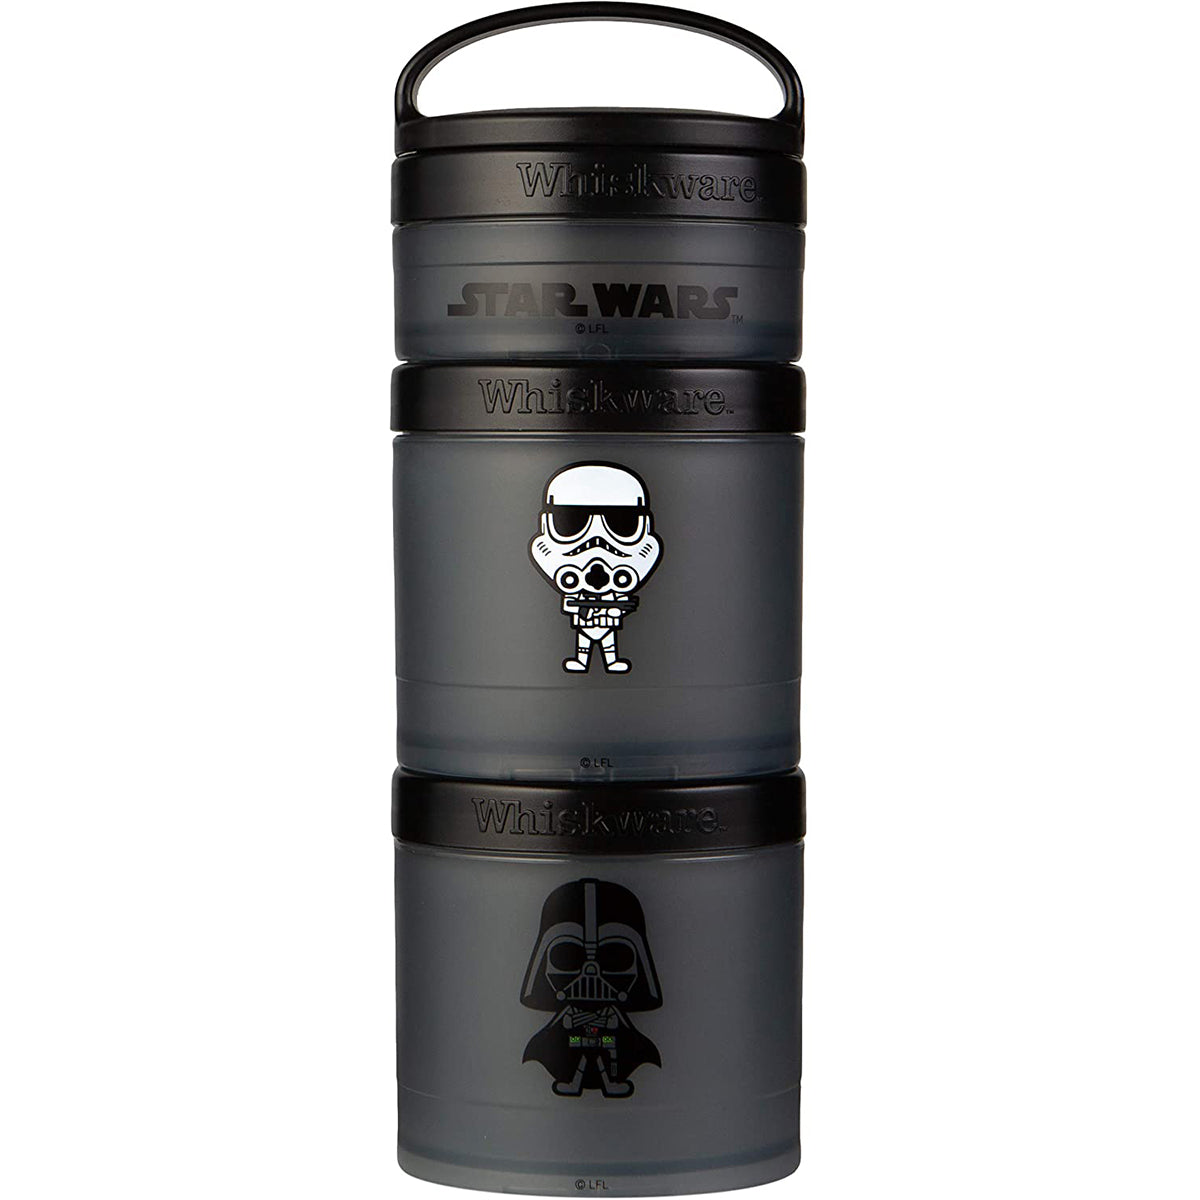 Whiskware Star Wars Stackable Snack Pack Containers Whiskware